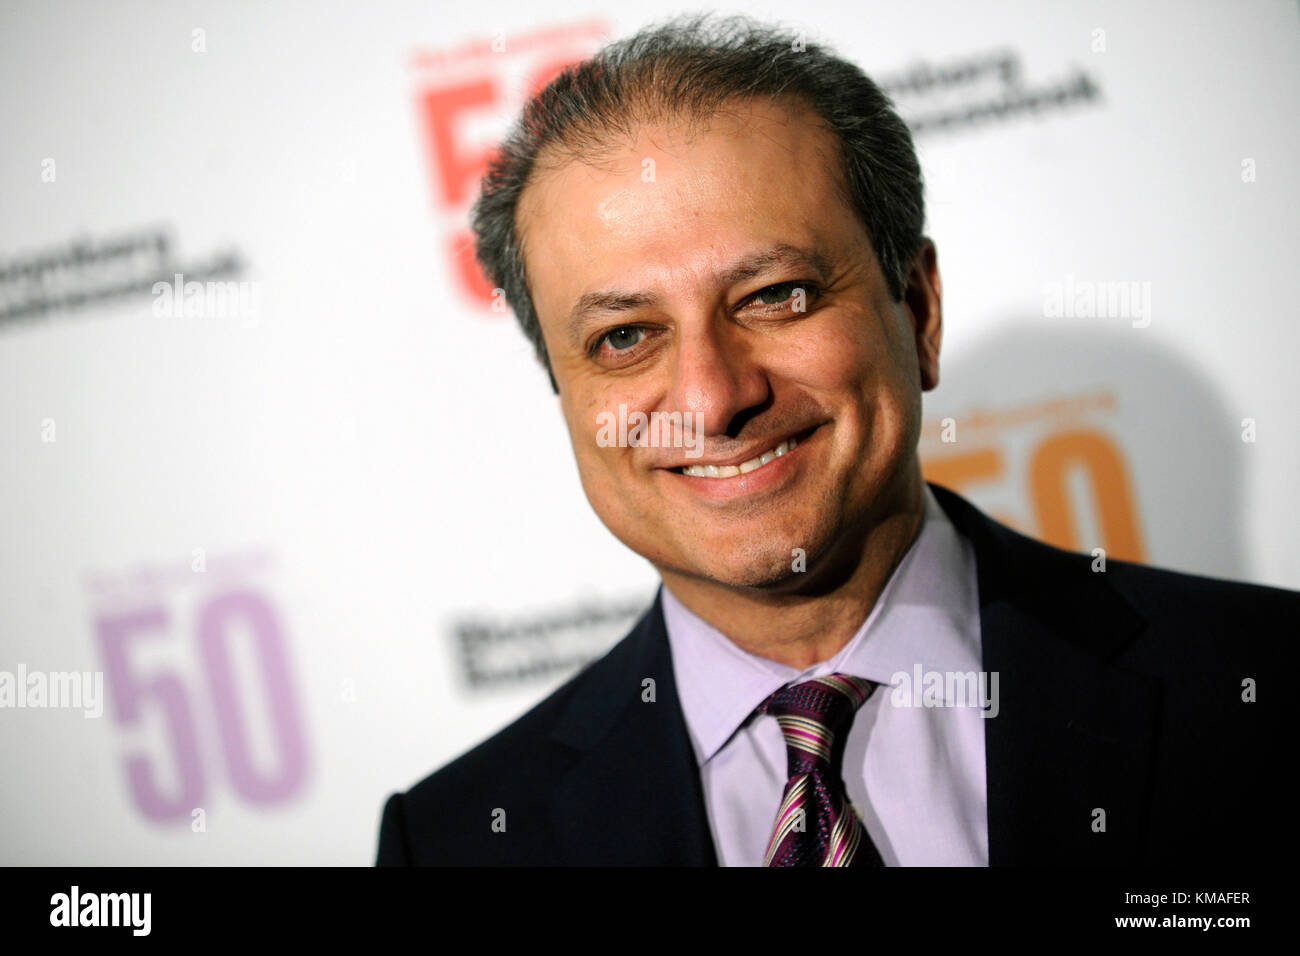 Preet Bharara attends 'The Bloomberg 50' Celebration at the Gotham Hall on December 4, 2017 in New York City. Stock Photo